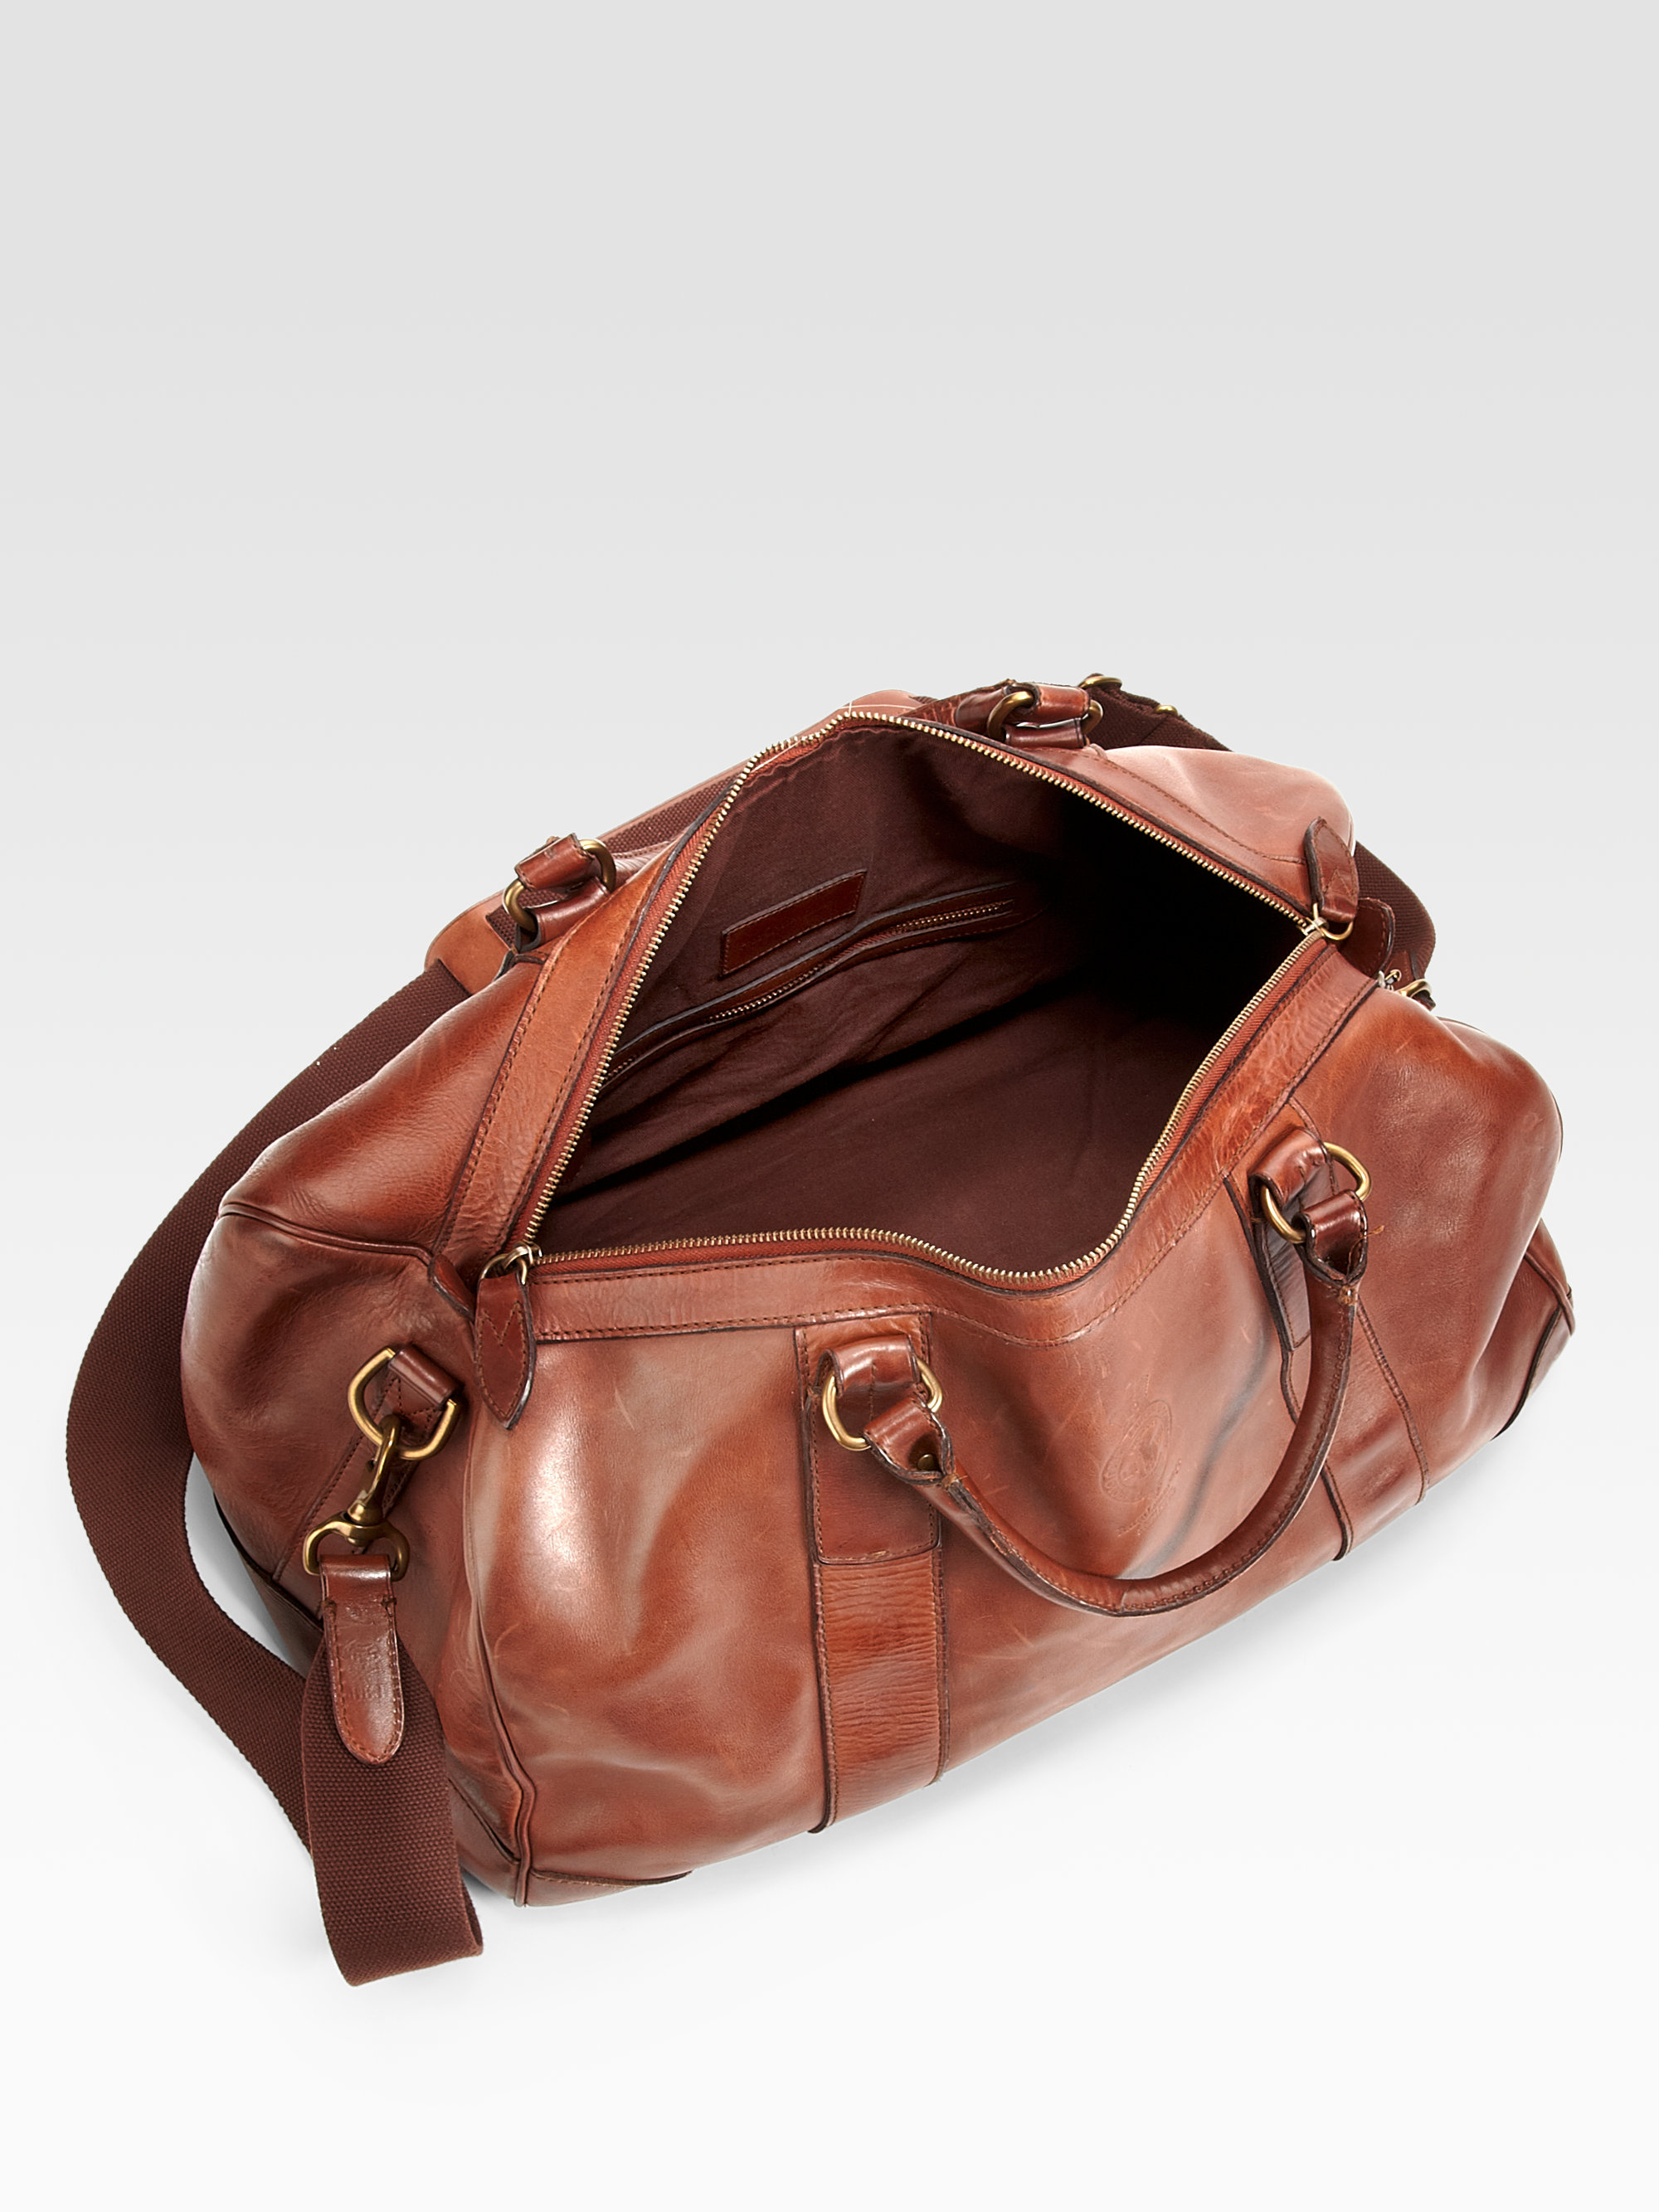 Polo Ralph Lauren Leather Gym Bag in Brown for Men - Lyst